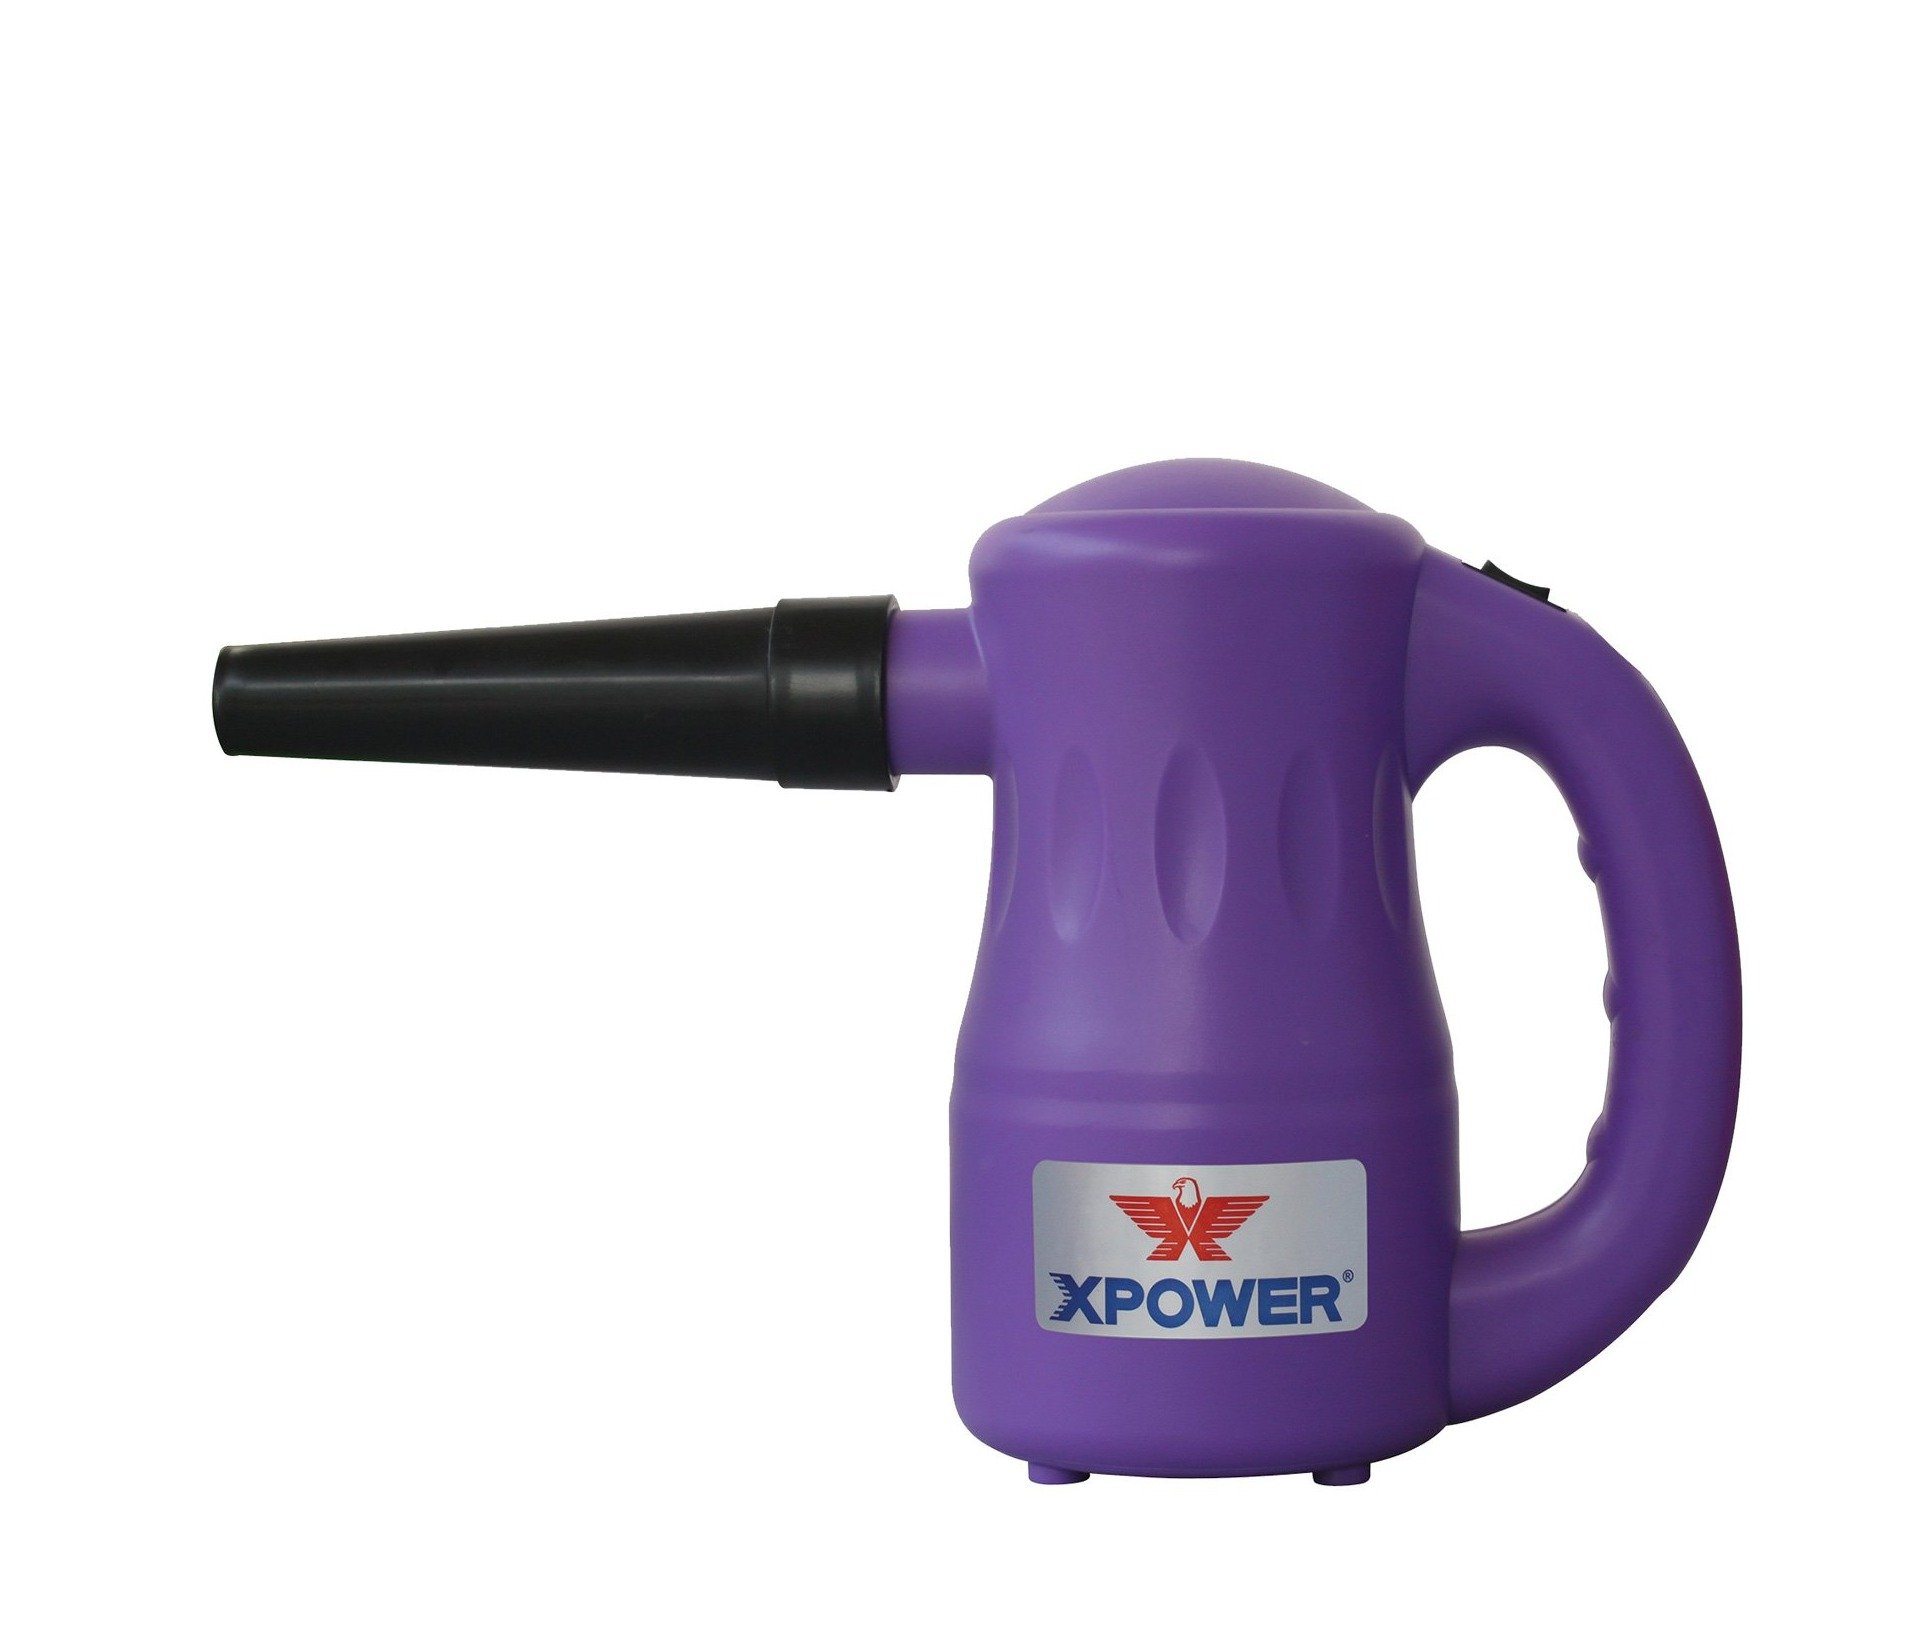 XPOWER B-53 Airrow Pro Multipurpose Home Pet Dryer, Duster, Air Pump, Blower-Dryers-Pet's Choice Supply